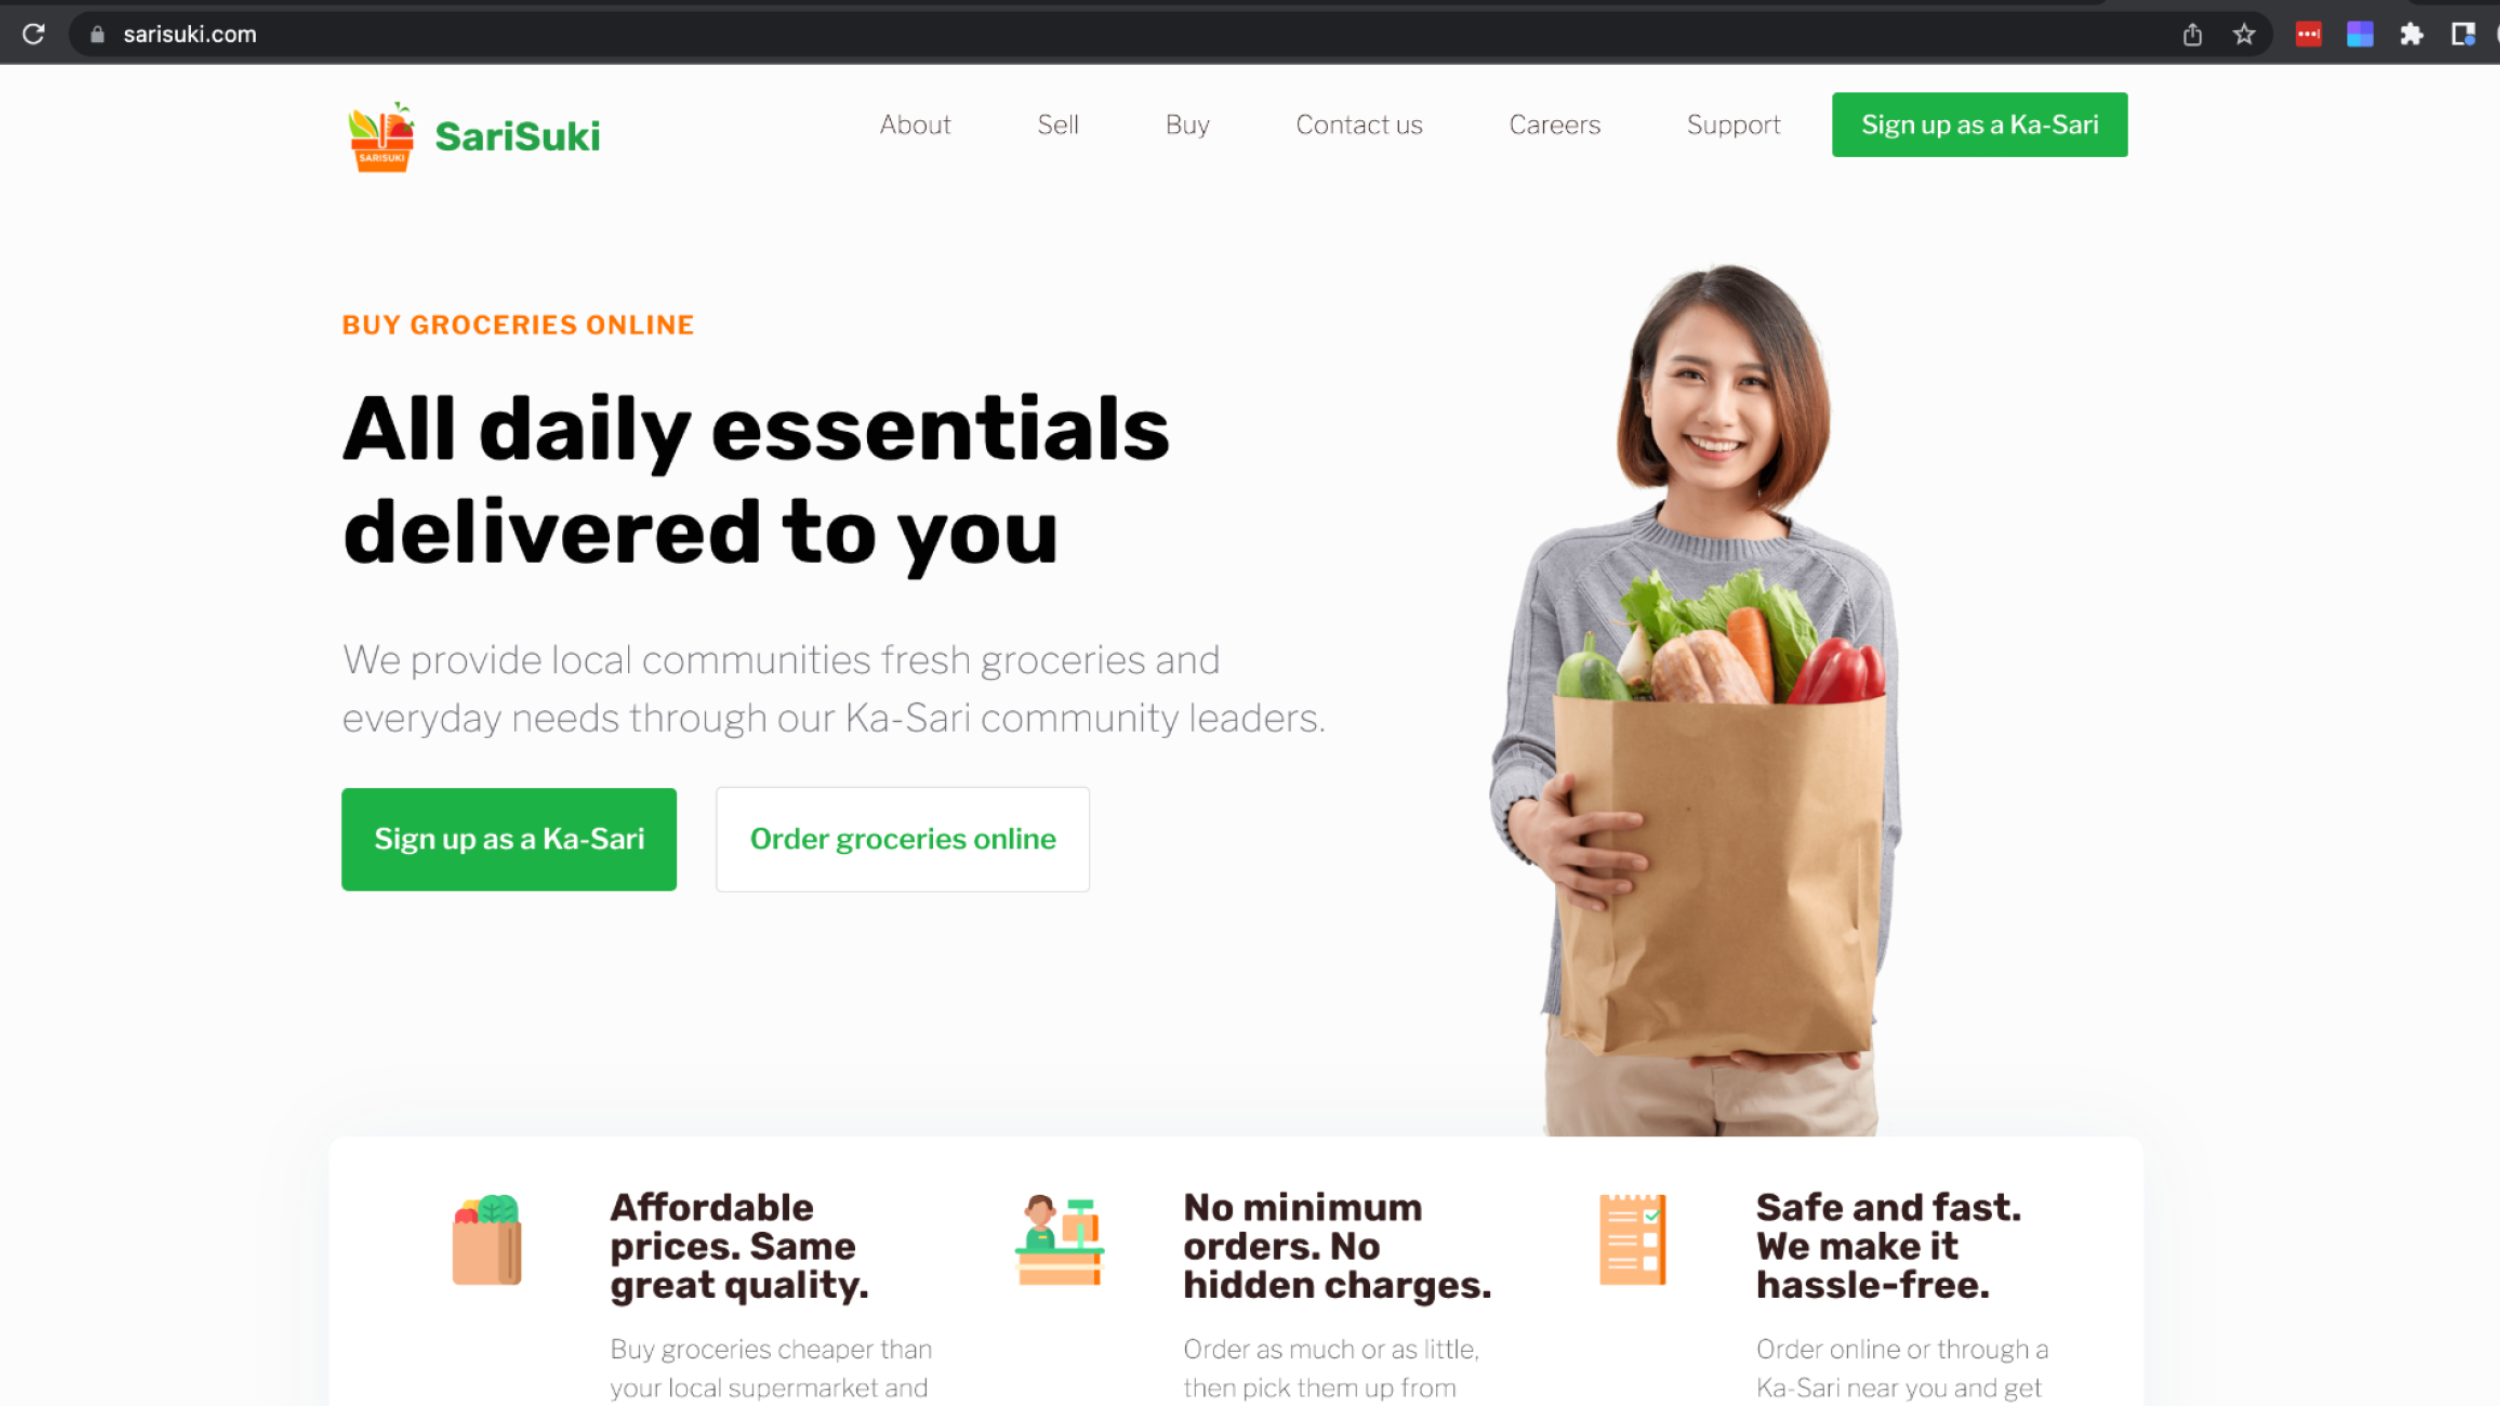 Buy groceries online. All daily essentials delivered to you.